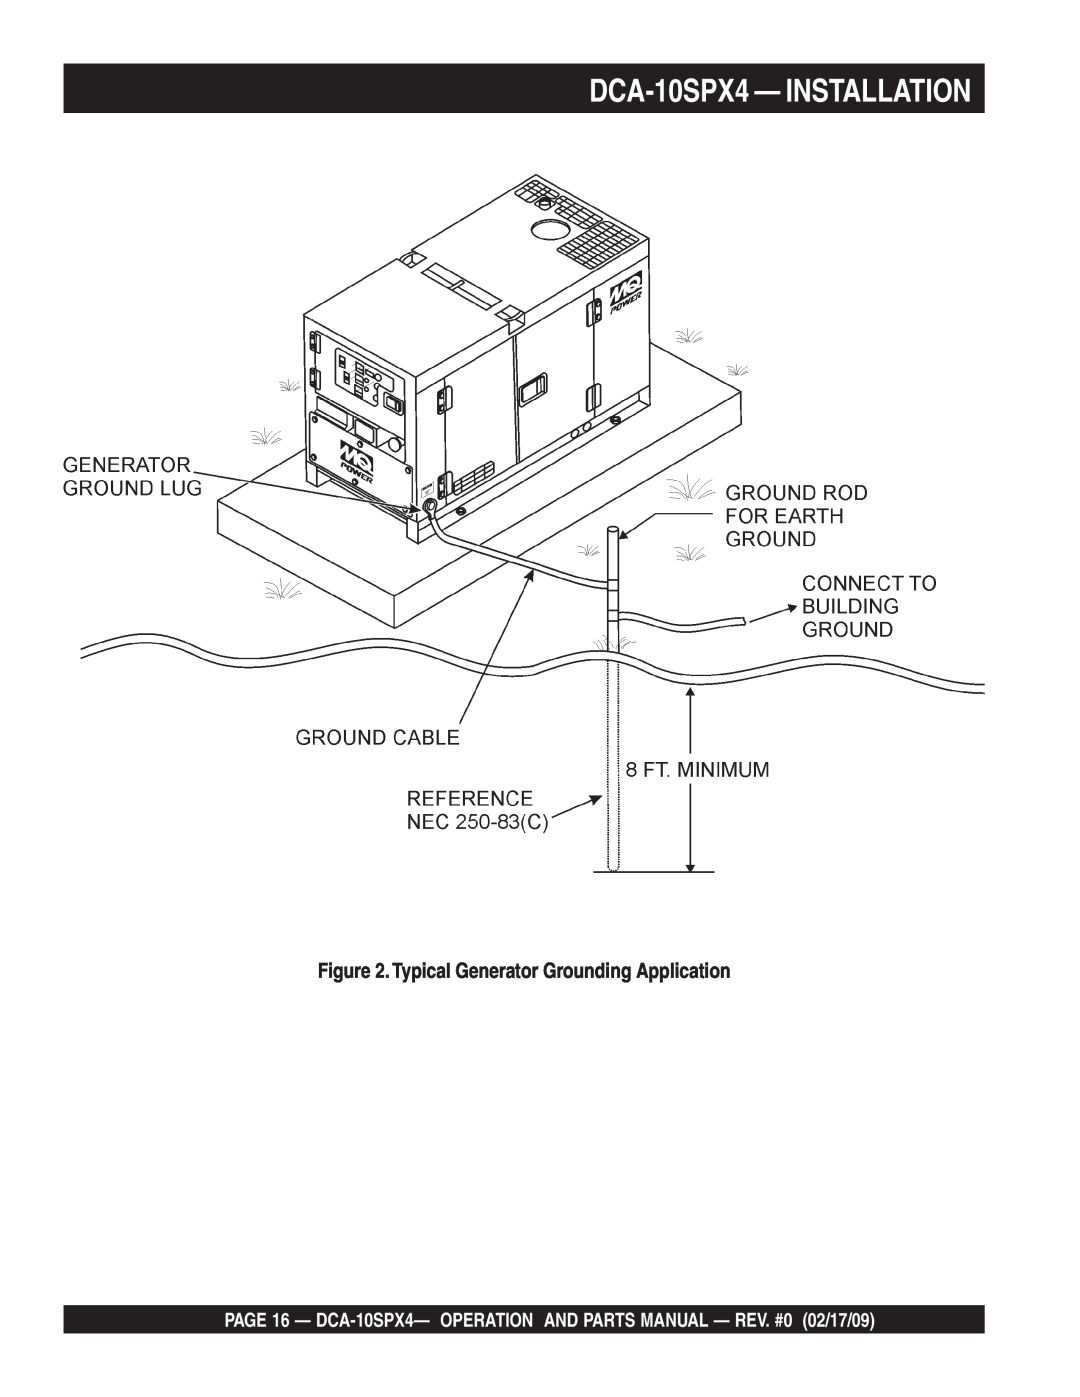 Multiquip operation manual DCA-10SPX4 - INSTALLATION, Typical Generator Grounding Application 